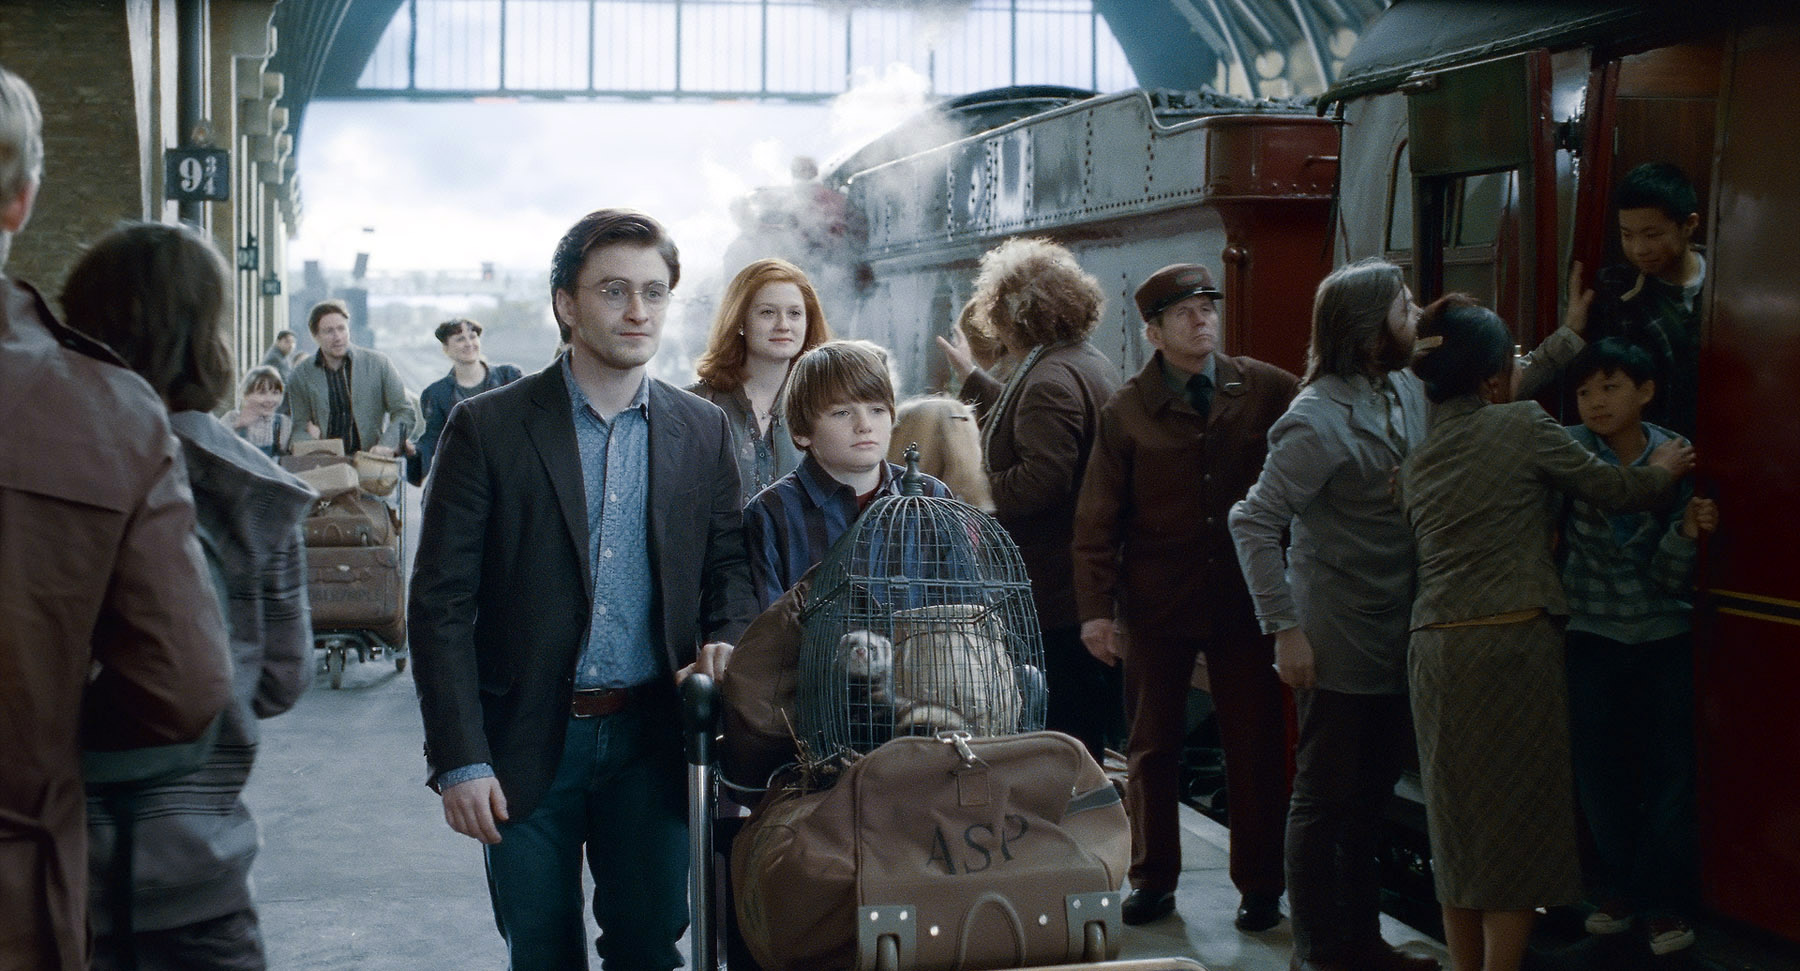 Daniel Radcliffe as Harry Potter and Arthur Bowen as Albus Severus Potter in Harry Potter and the Deathly Hallows - Part 2